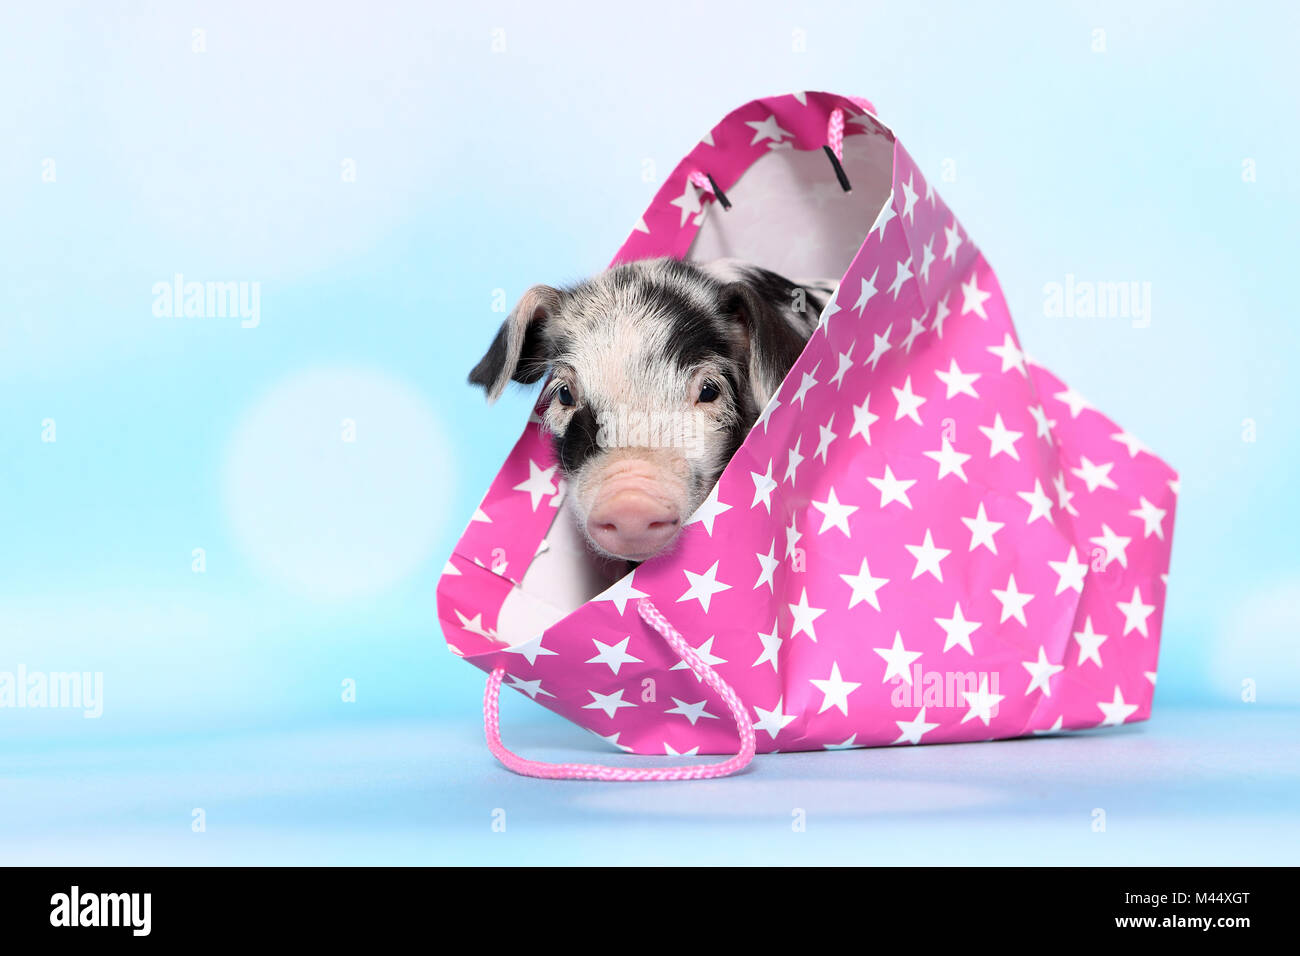 Domestic Pig, Turopolje x ?. Piglet (1 week old) in a pink carrier with star print. Studio picture against a light blue background. Germany Stock Photo